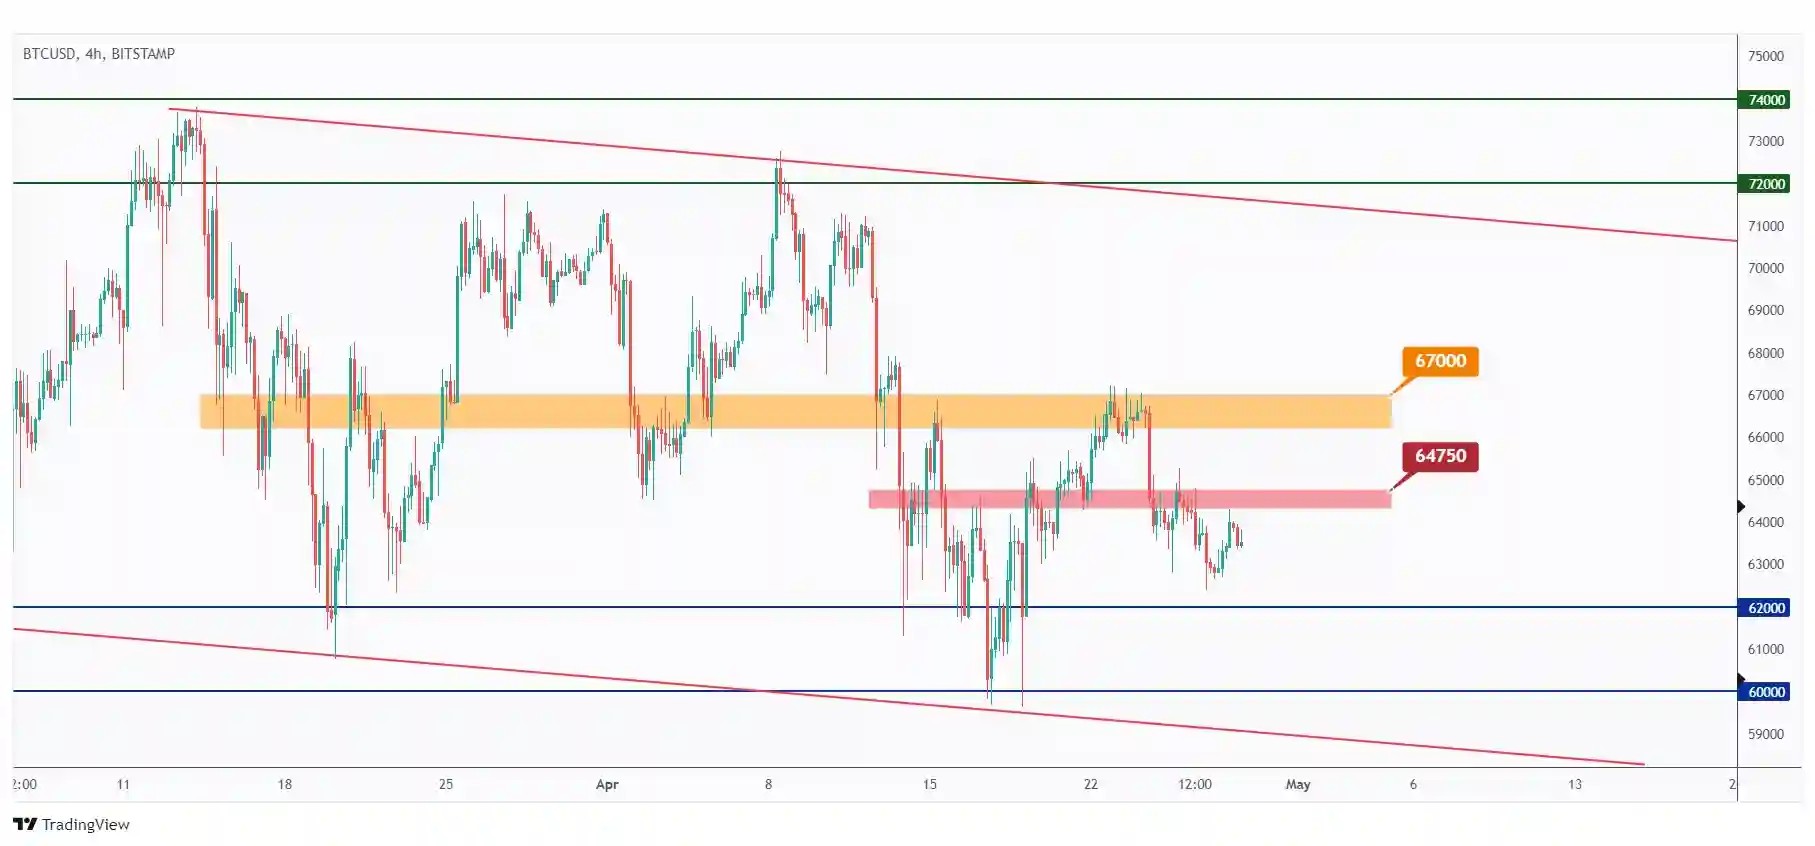 BTC 4h chart showing the last minor and major highs at $64,750 and $67,000 respectively that we need a break above for the bulls to take over.